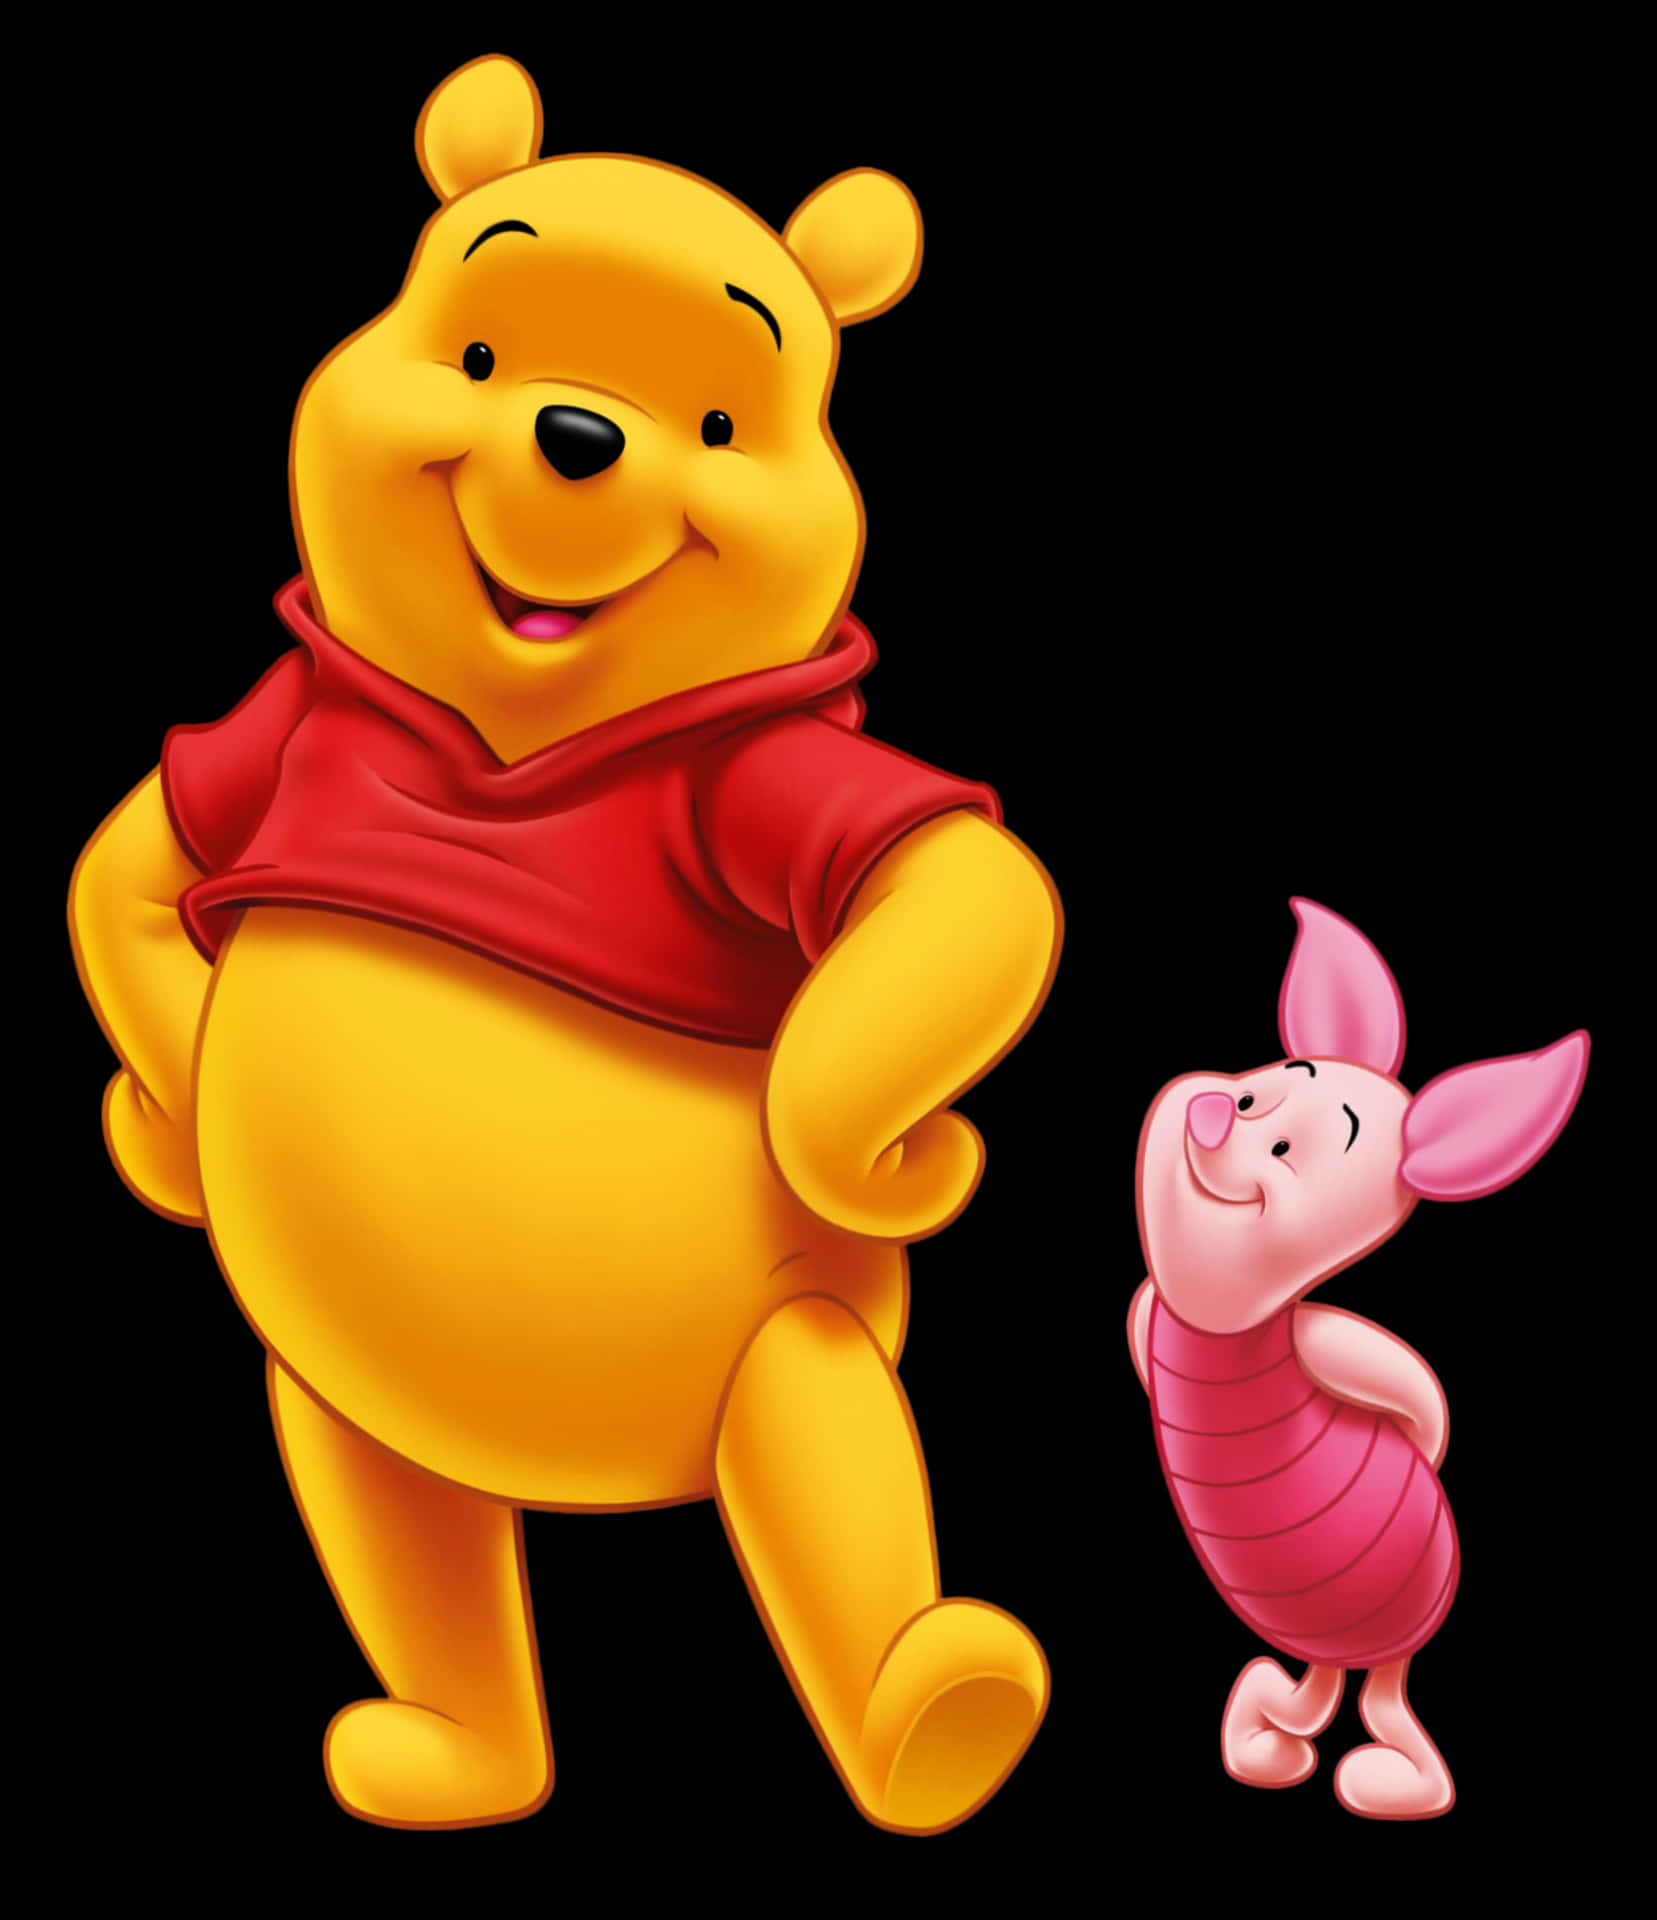 Join Winnie the Pooh and Friends in the Hundred Acre Woods.